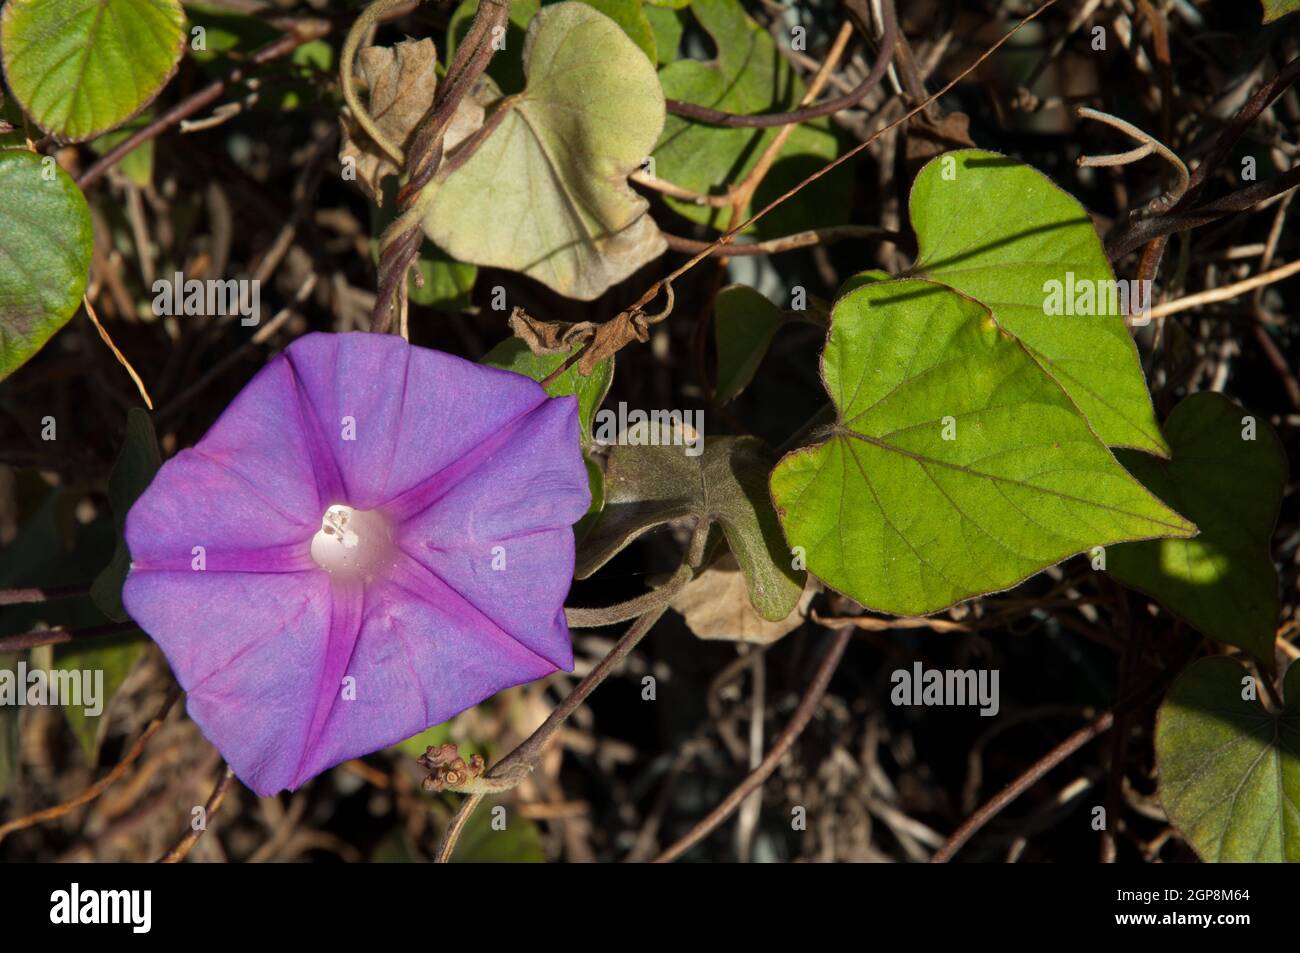 Flower and leaves of blue morning glory Ipomoea indica. El Paso. La Palma. Canary Islands. Spain. Stock Photo